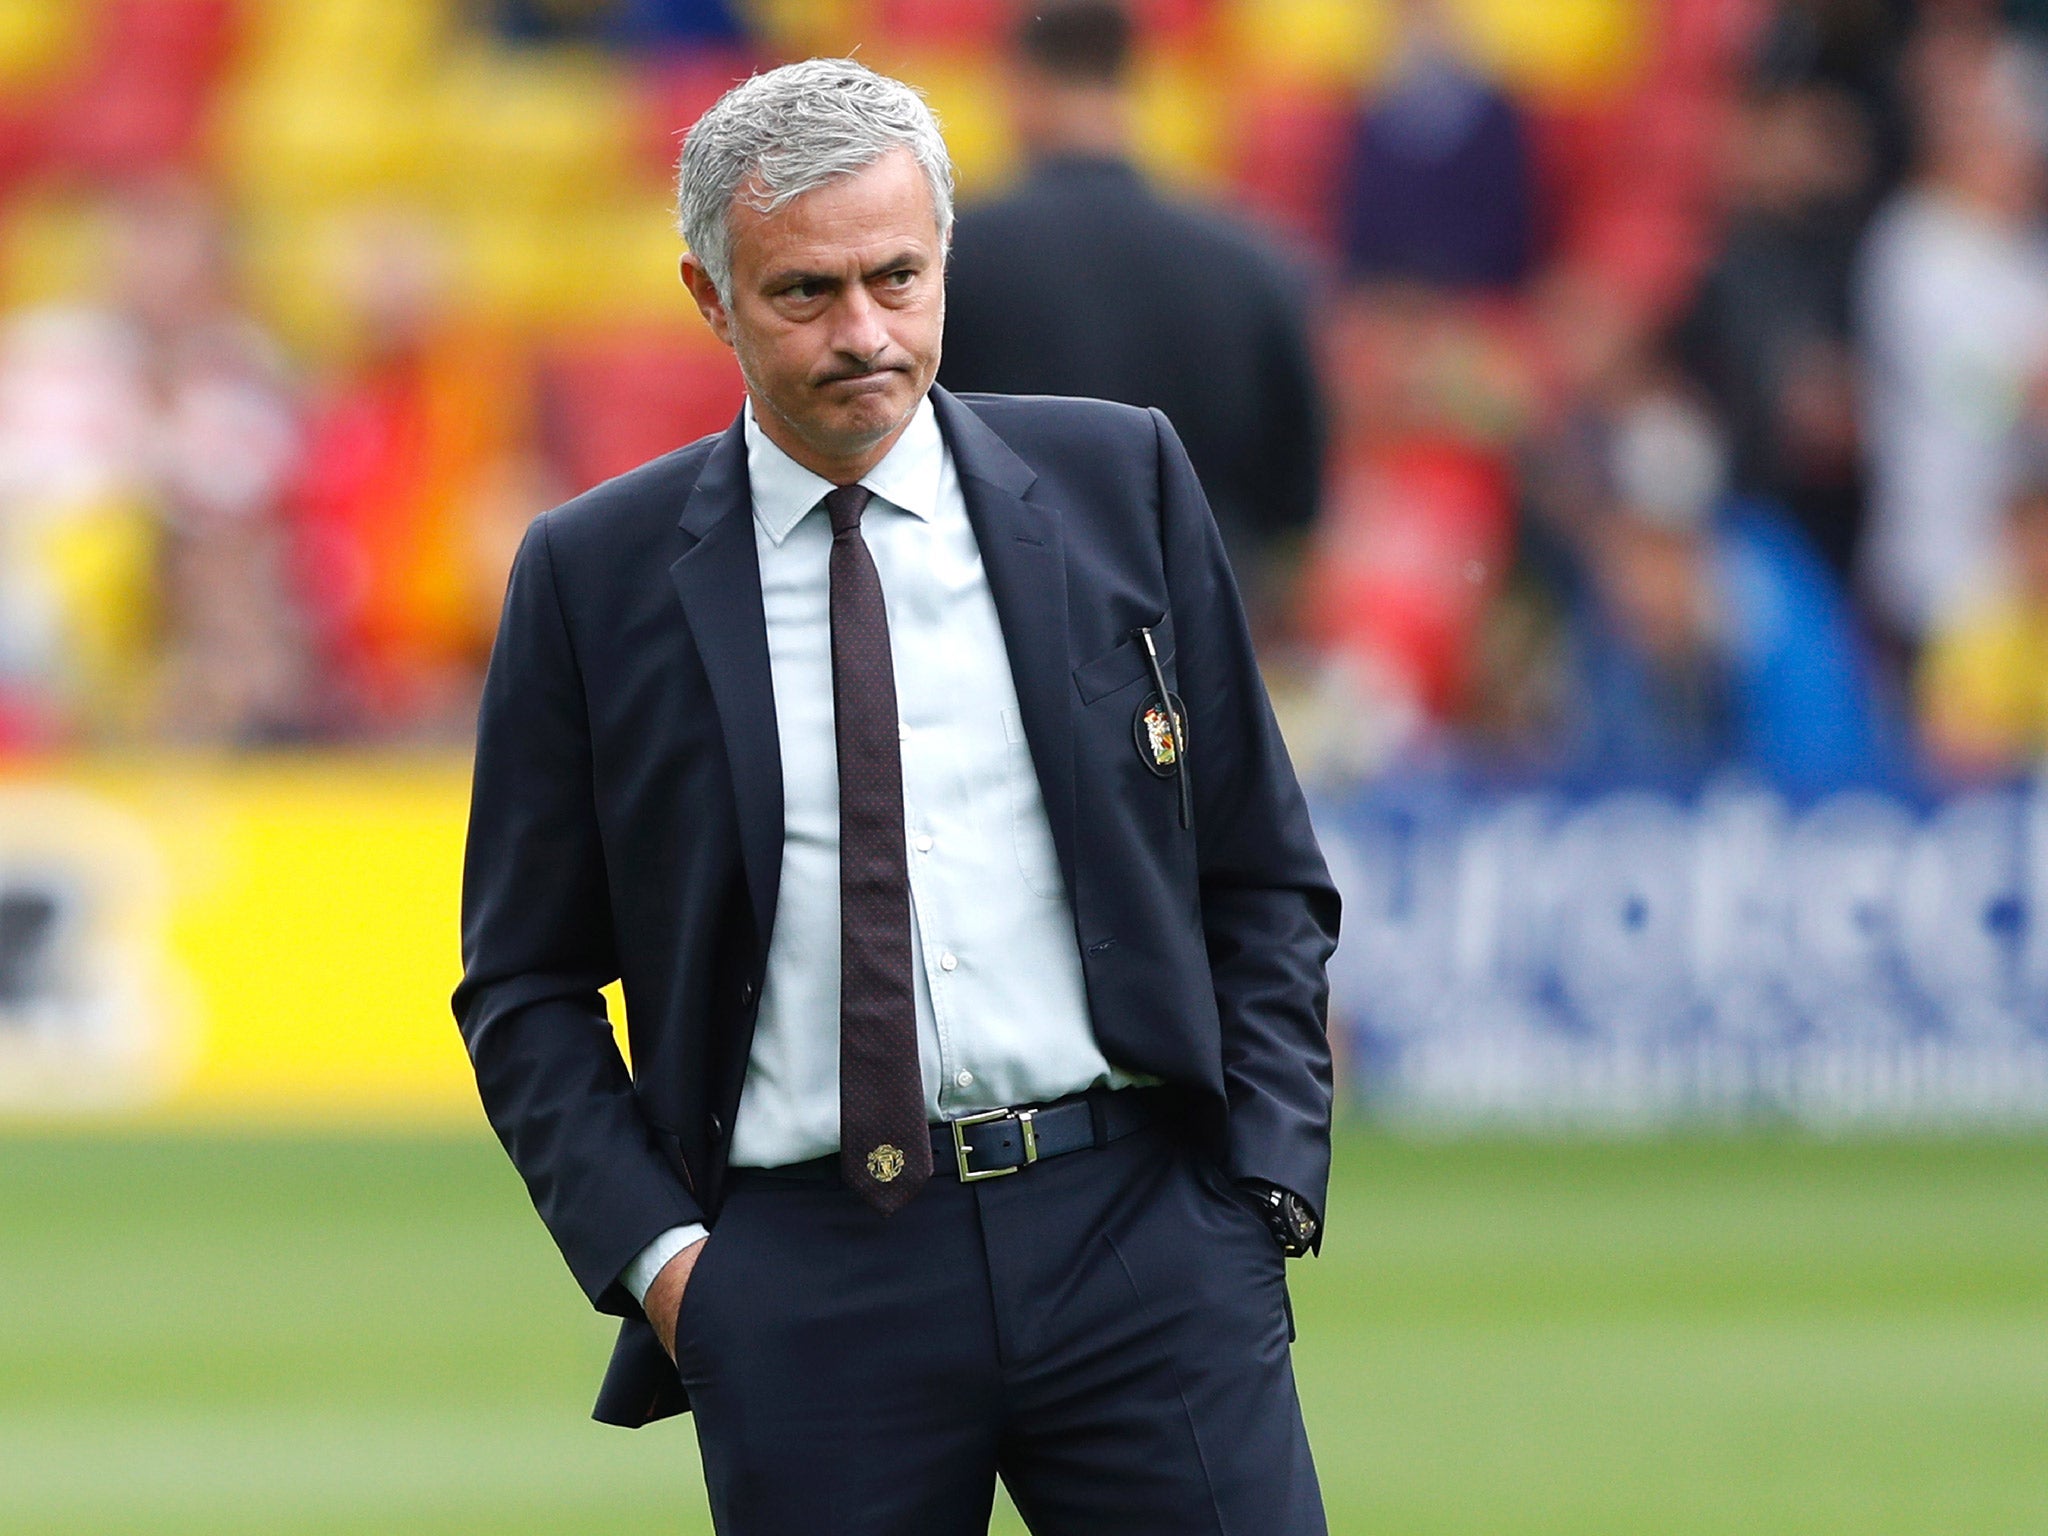 Jose Mourinho believes his players have not learnt the right lessons after slumping to a third straight defeat